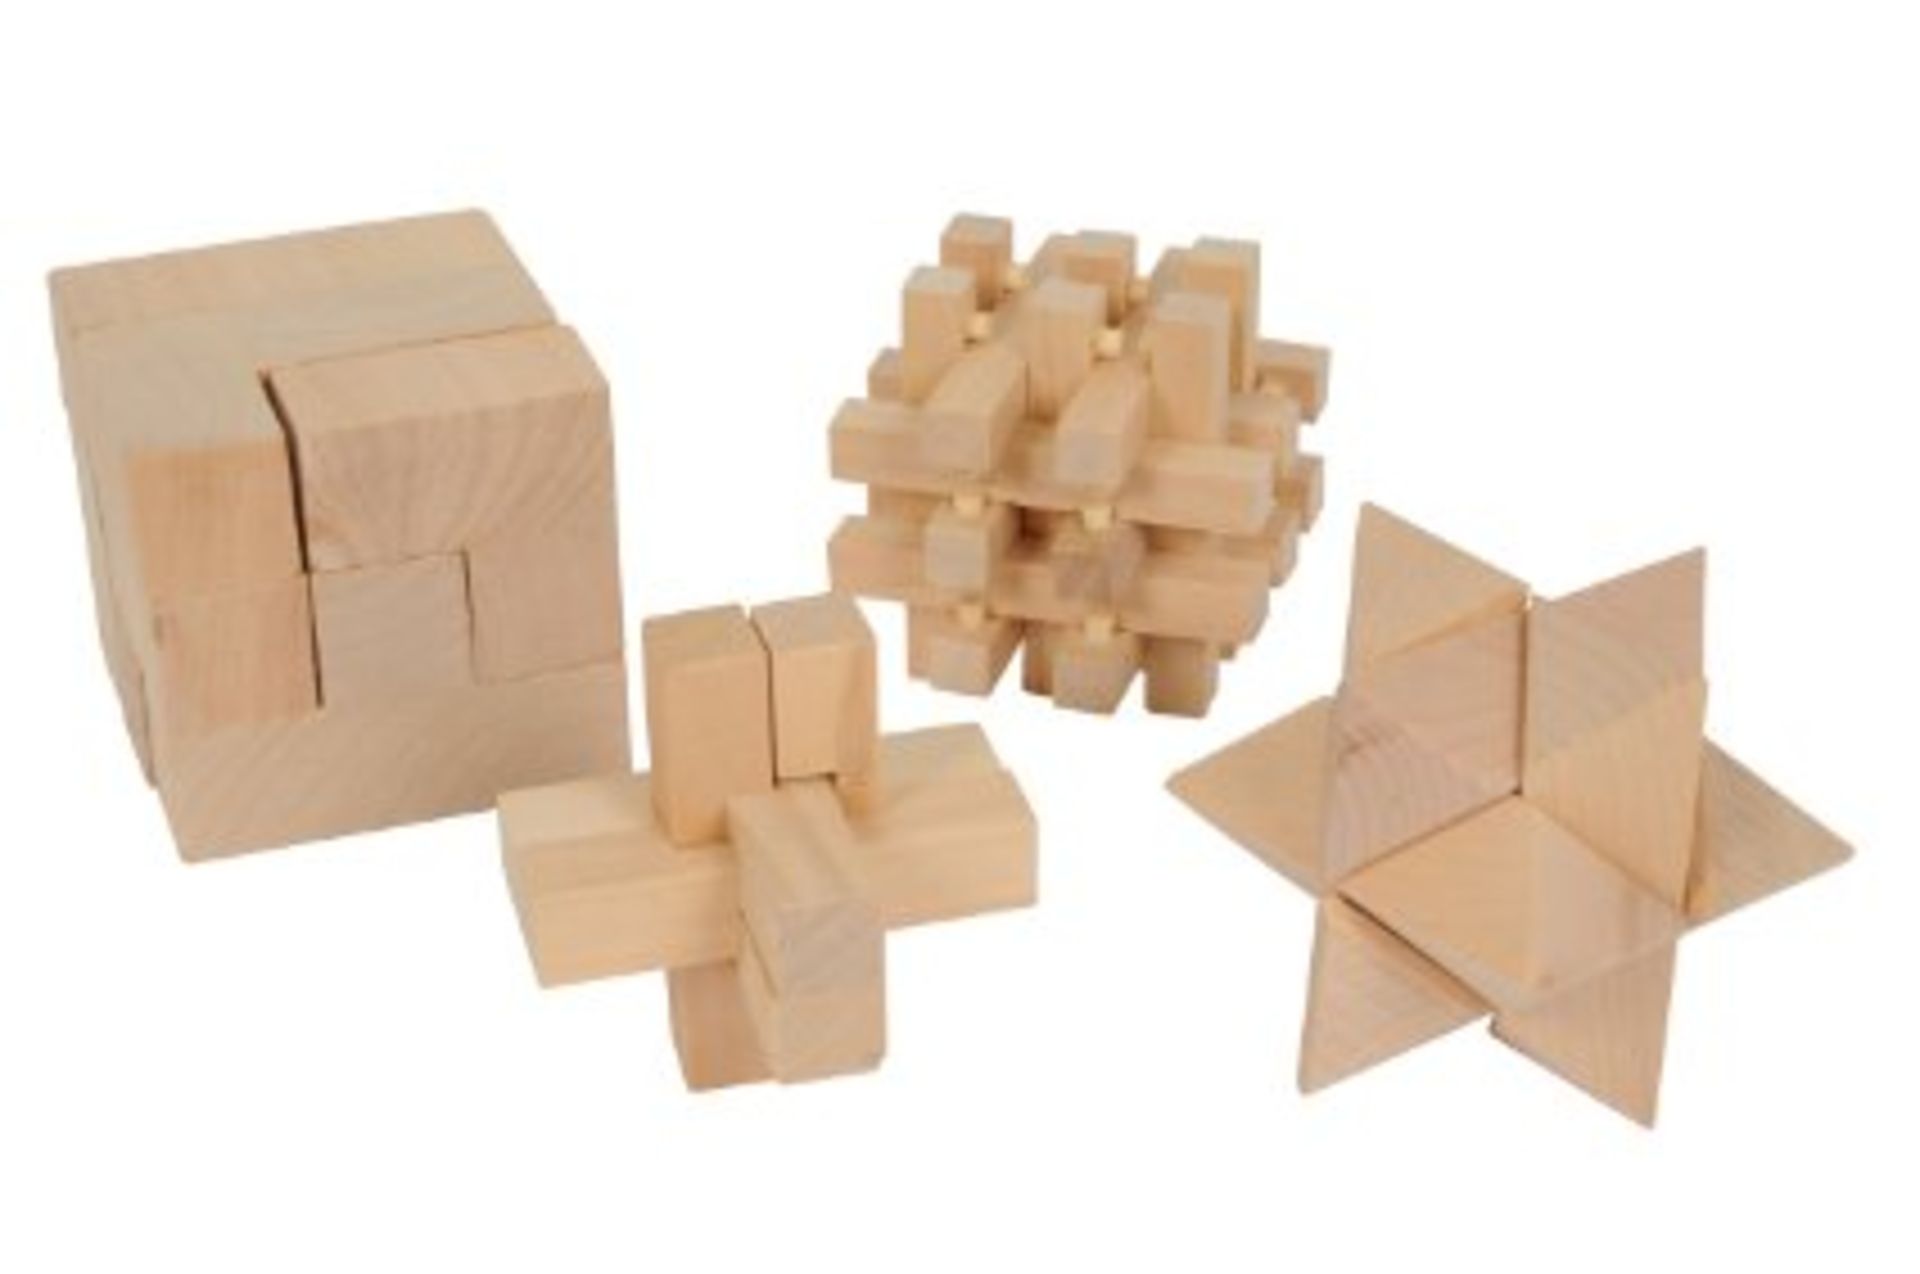 V Brand New Boxed Set Four Quality Wooden Brain Teaser Puzzles ú10.89 on Ebay X 2 YOUR BID PRICE